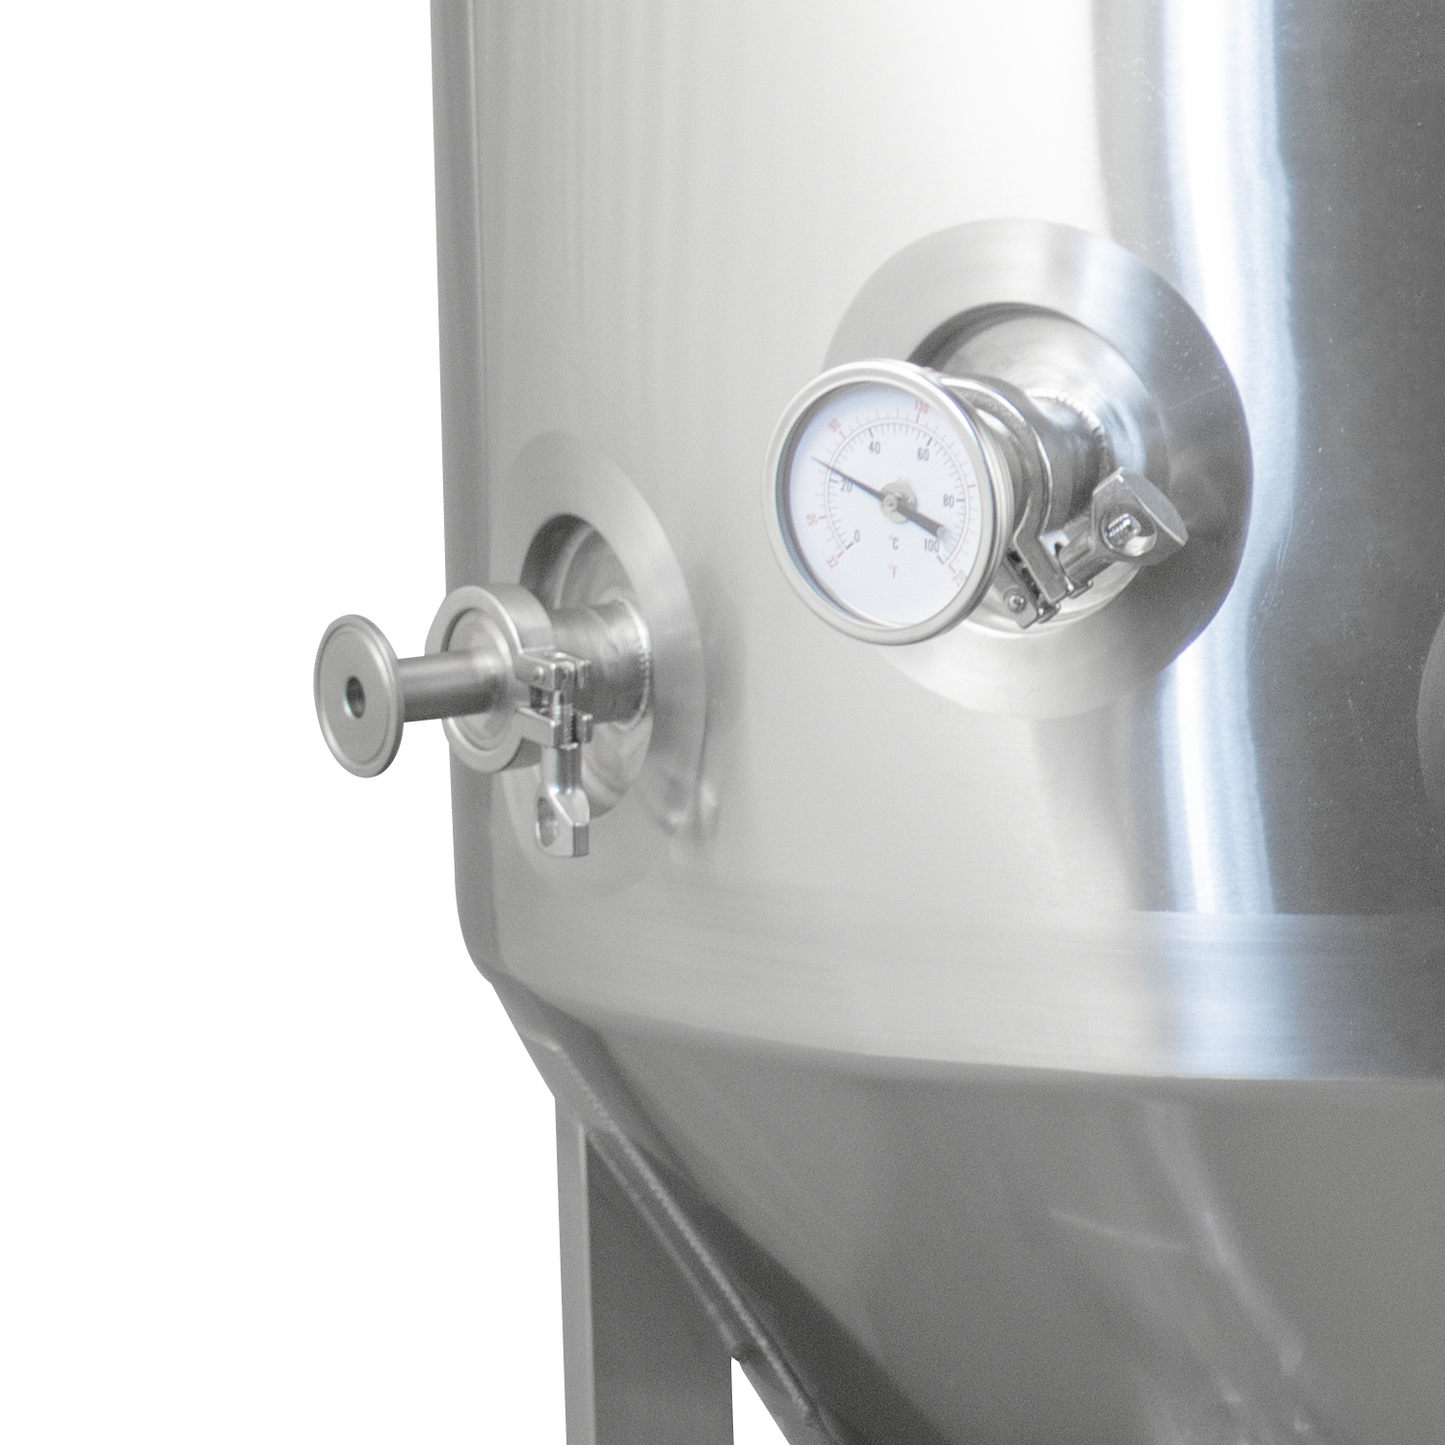 Conical Fermenter | Jacketed | 1 bbl